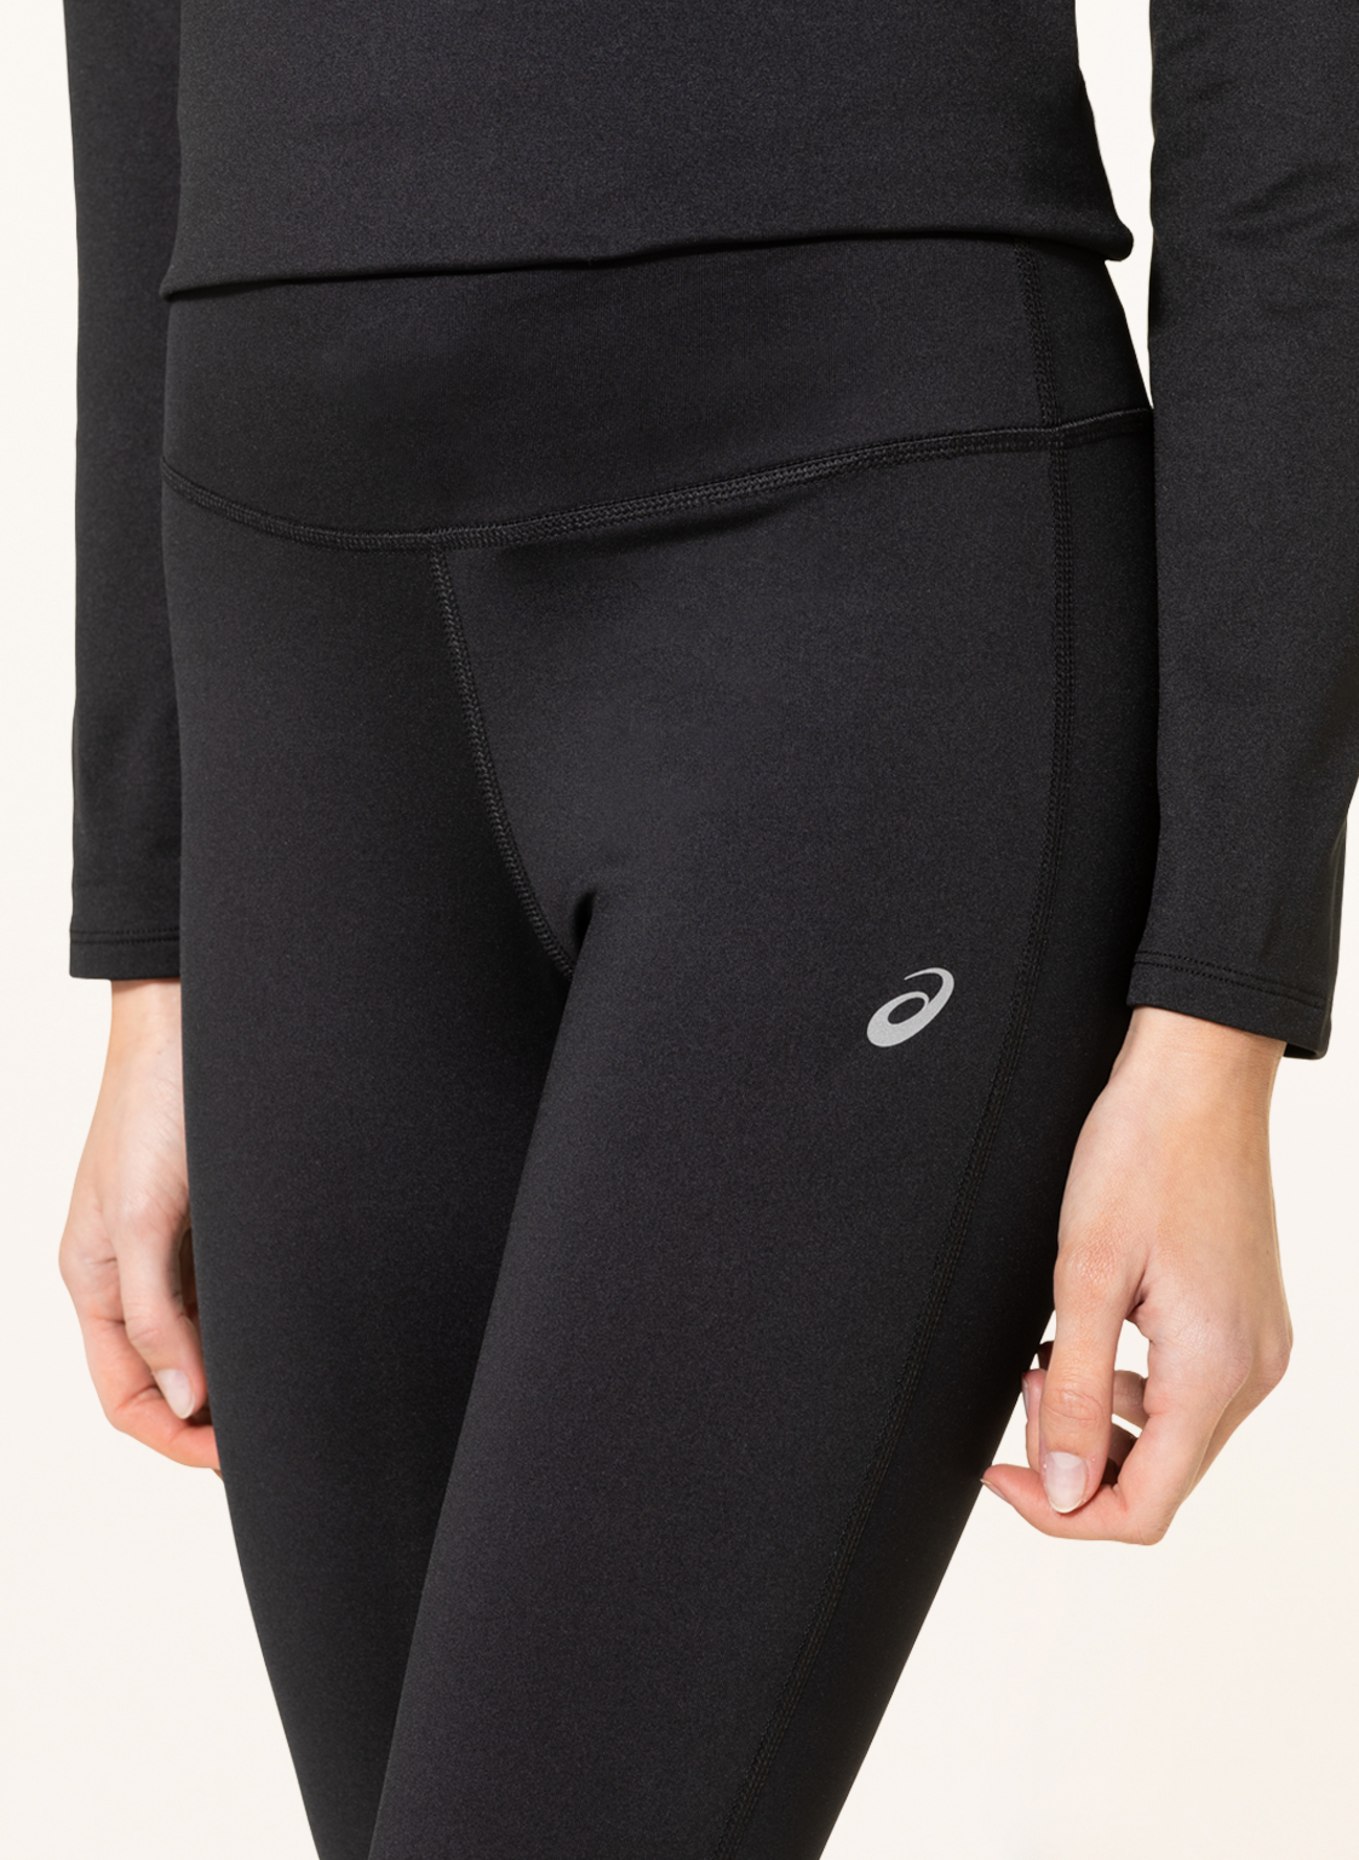 Asics Women's Road High Waist Tight Performance Black | Buy Asics Women's  Road High Waist Tight Performance Black here | Outnorth